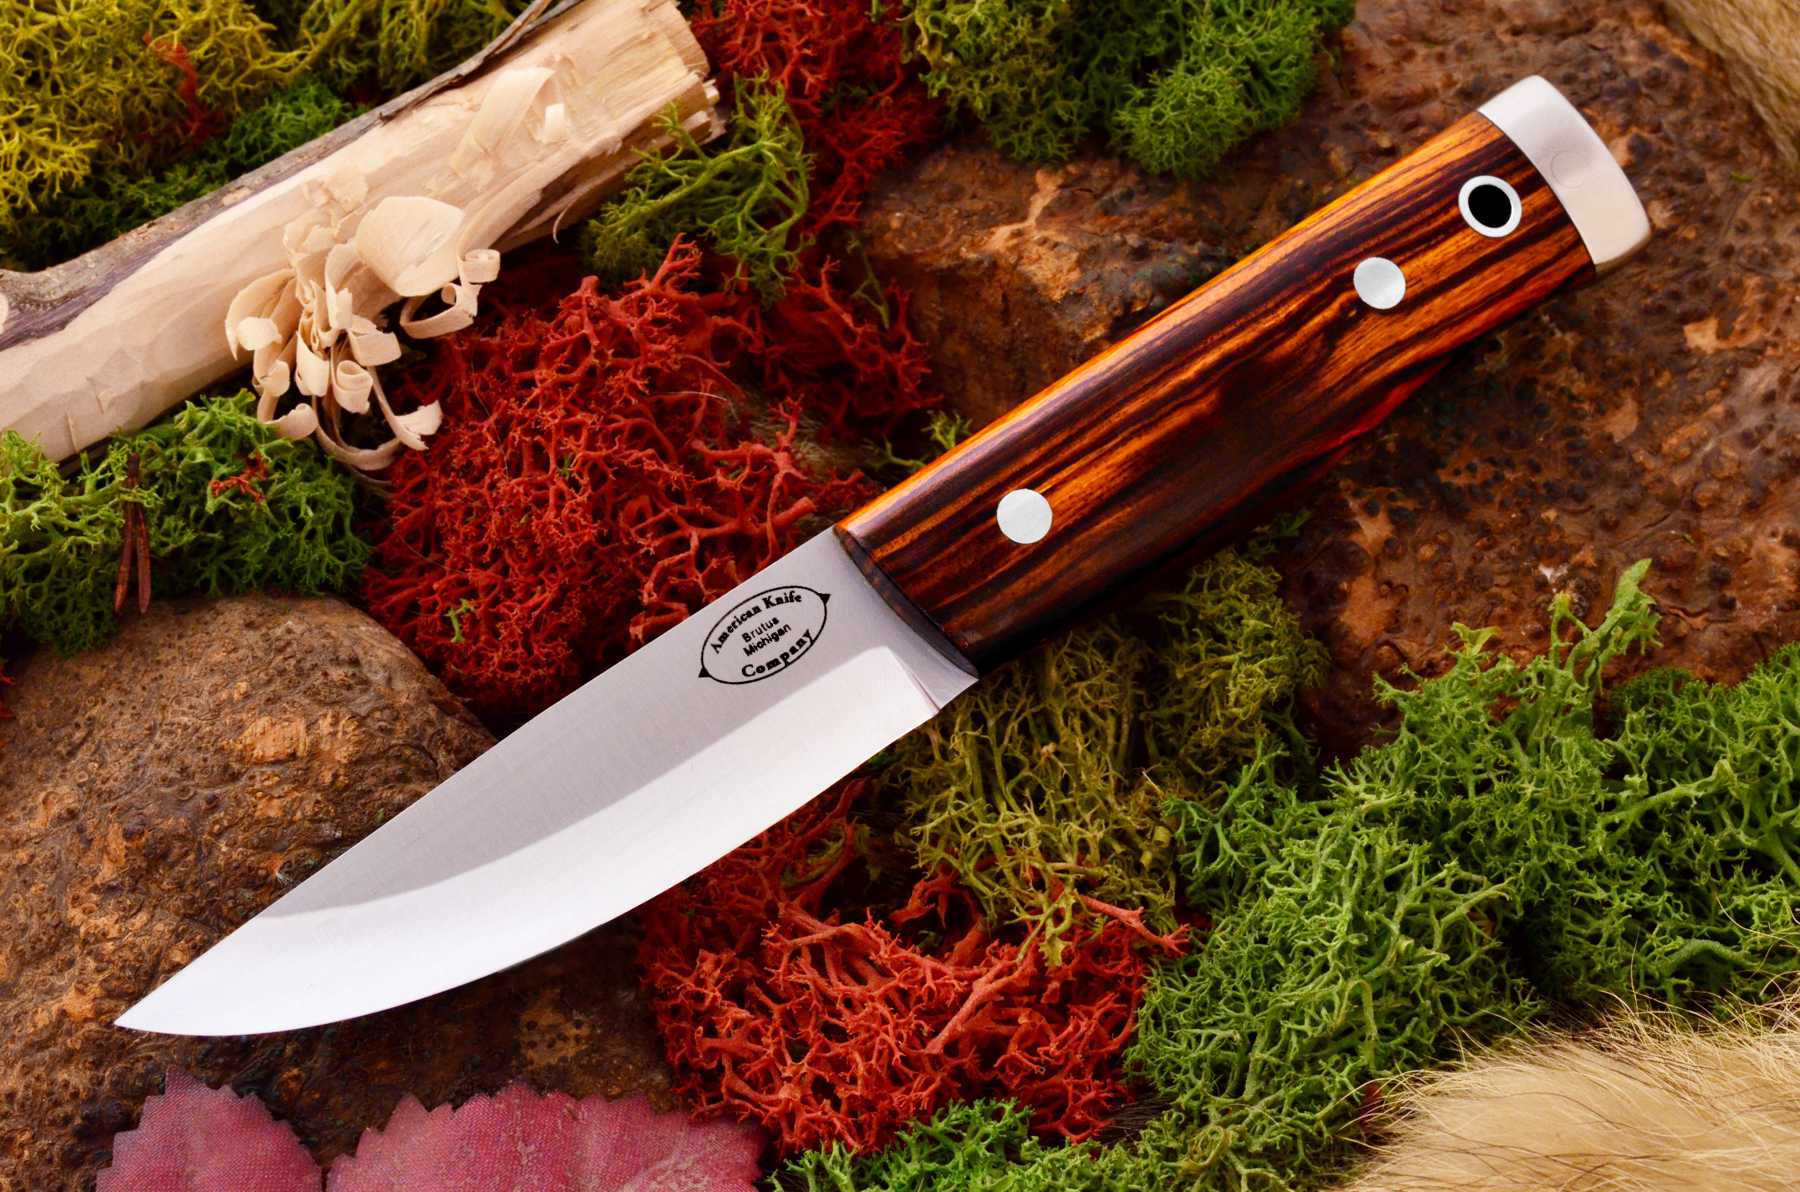 akc forest compact desert ironwood 359.95